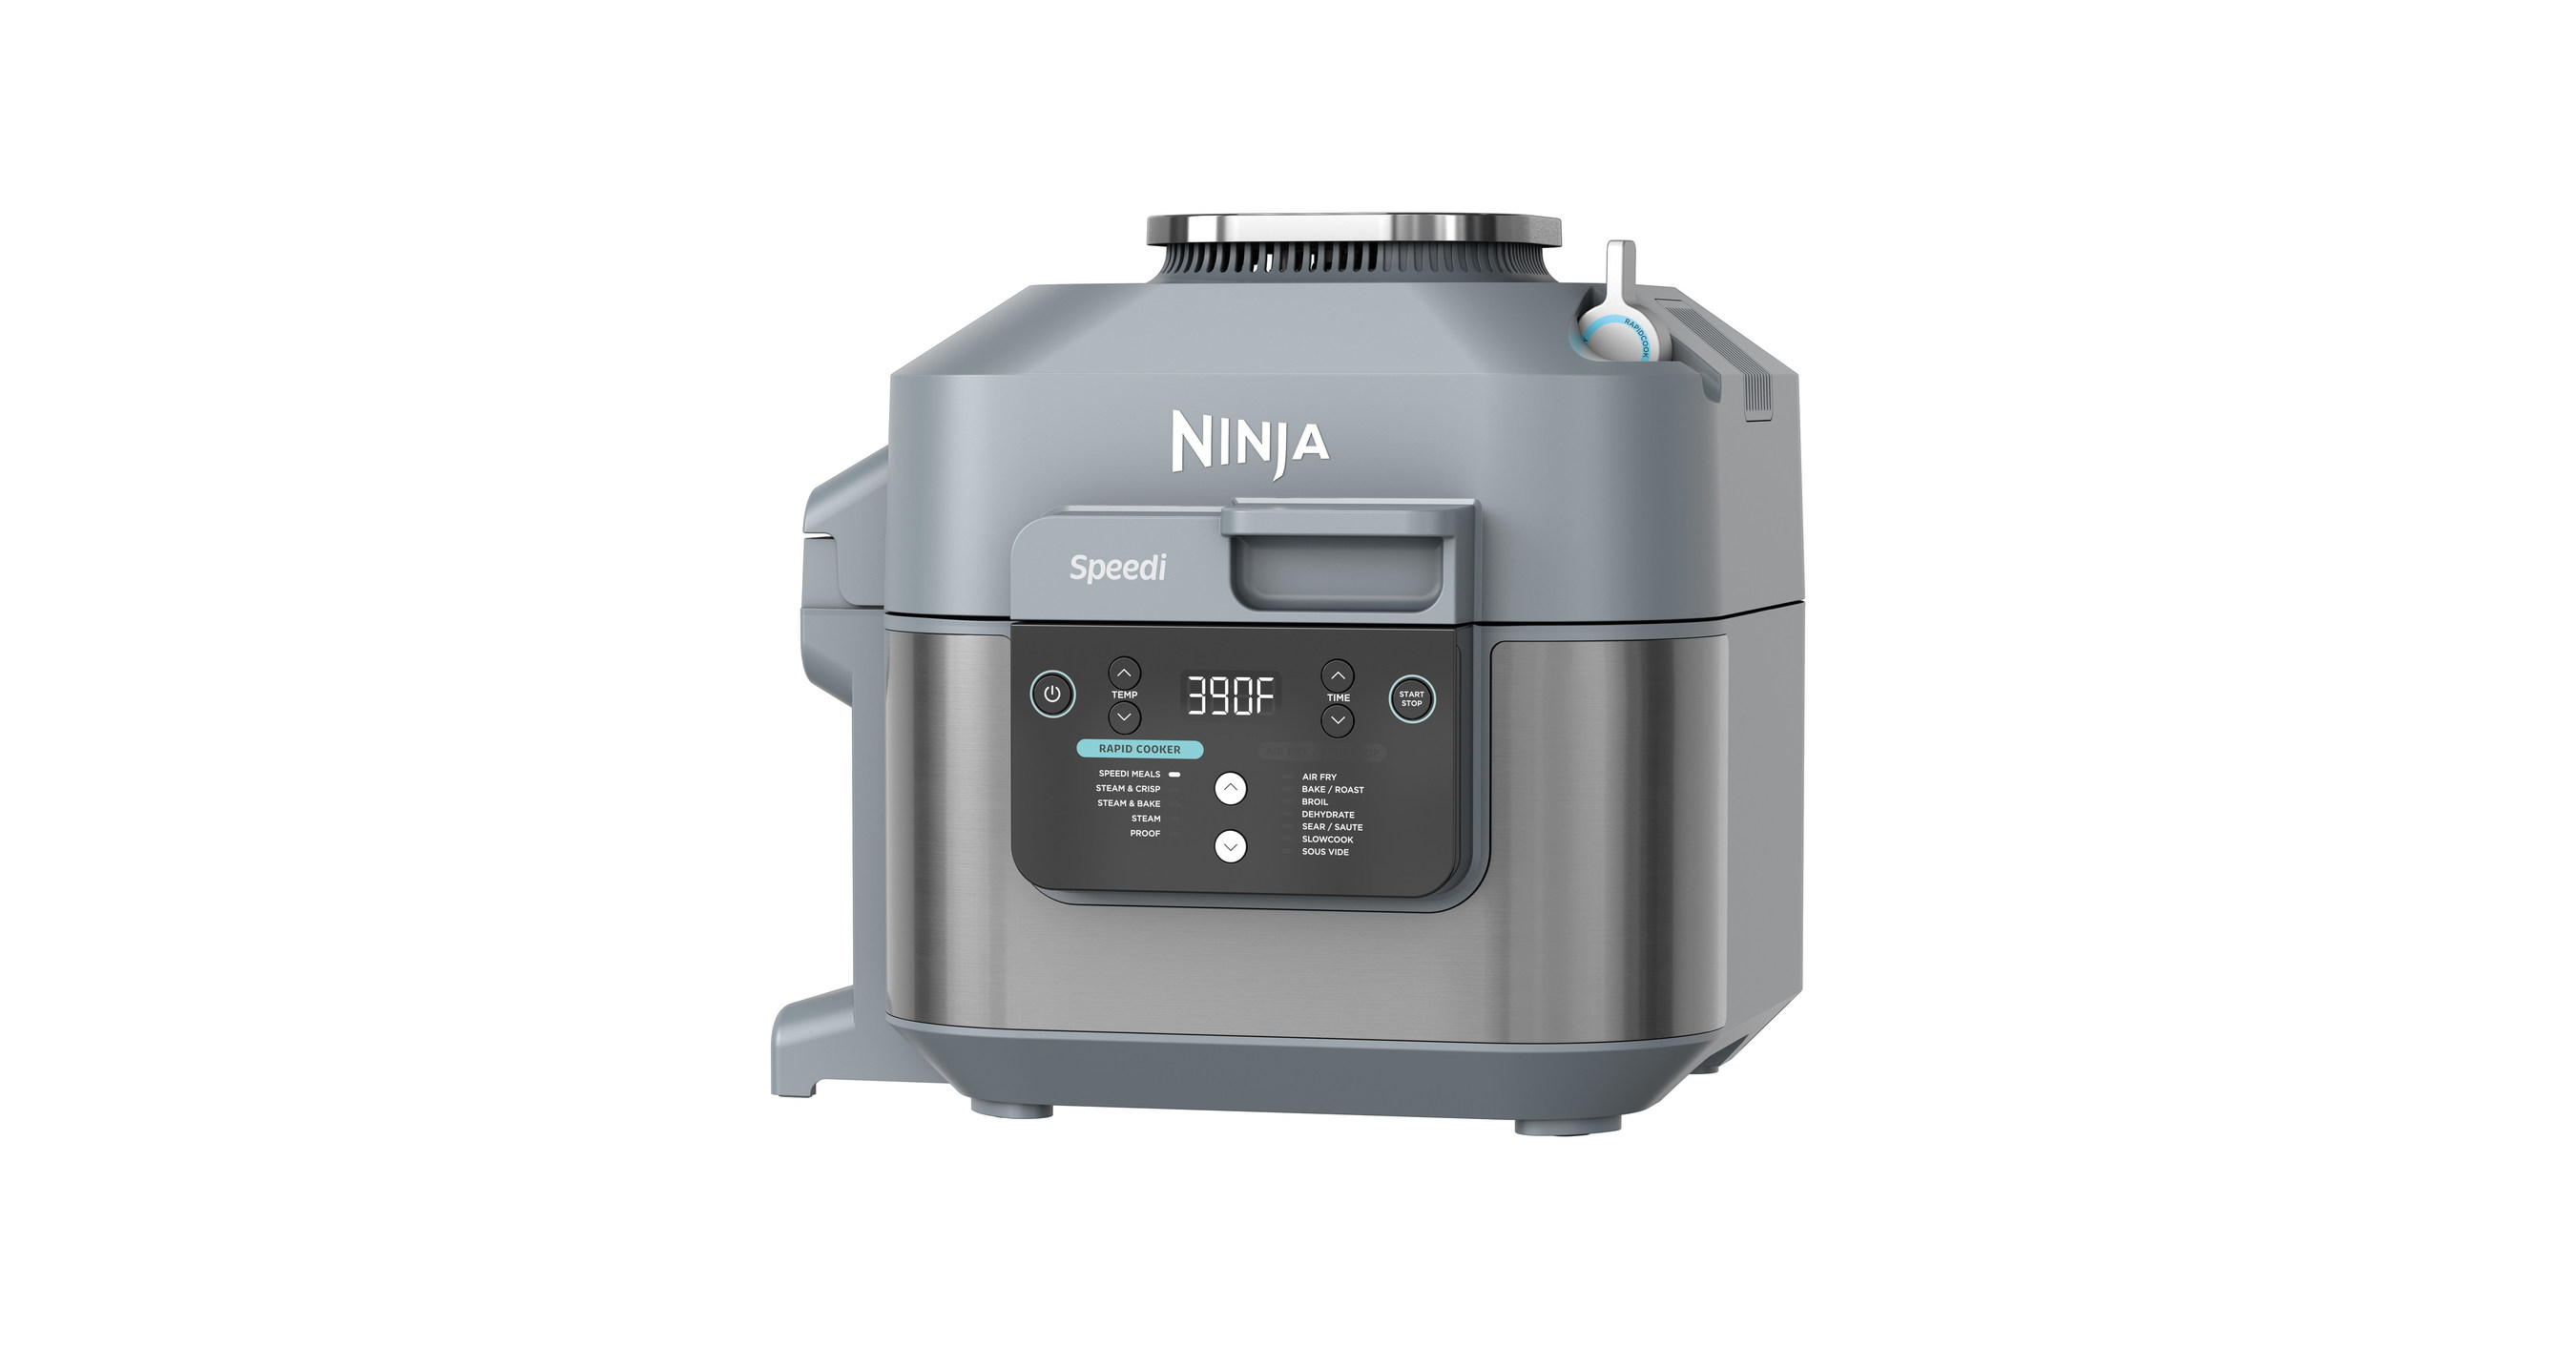 Ninja Speedi: a rapid cooker and air fryer that makes meals in minutes